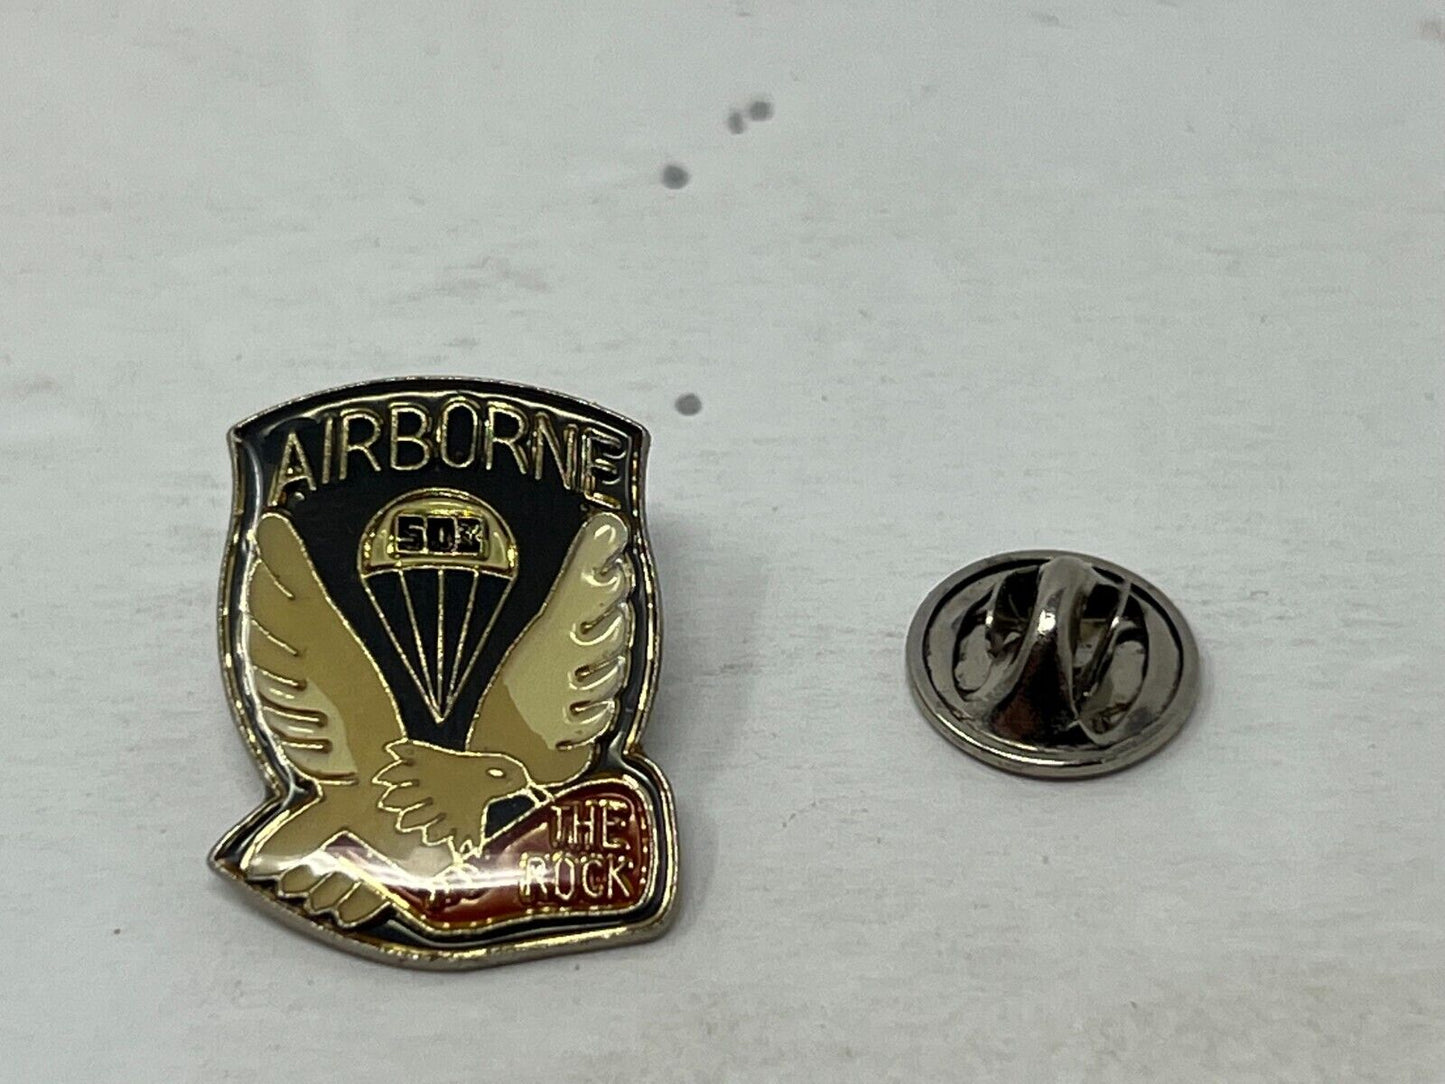 United States Army 503rd Parachute Infantry The Rock Militaria Lapel Pin